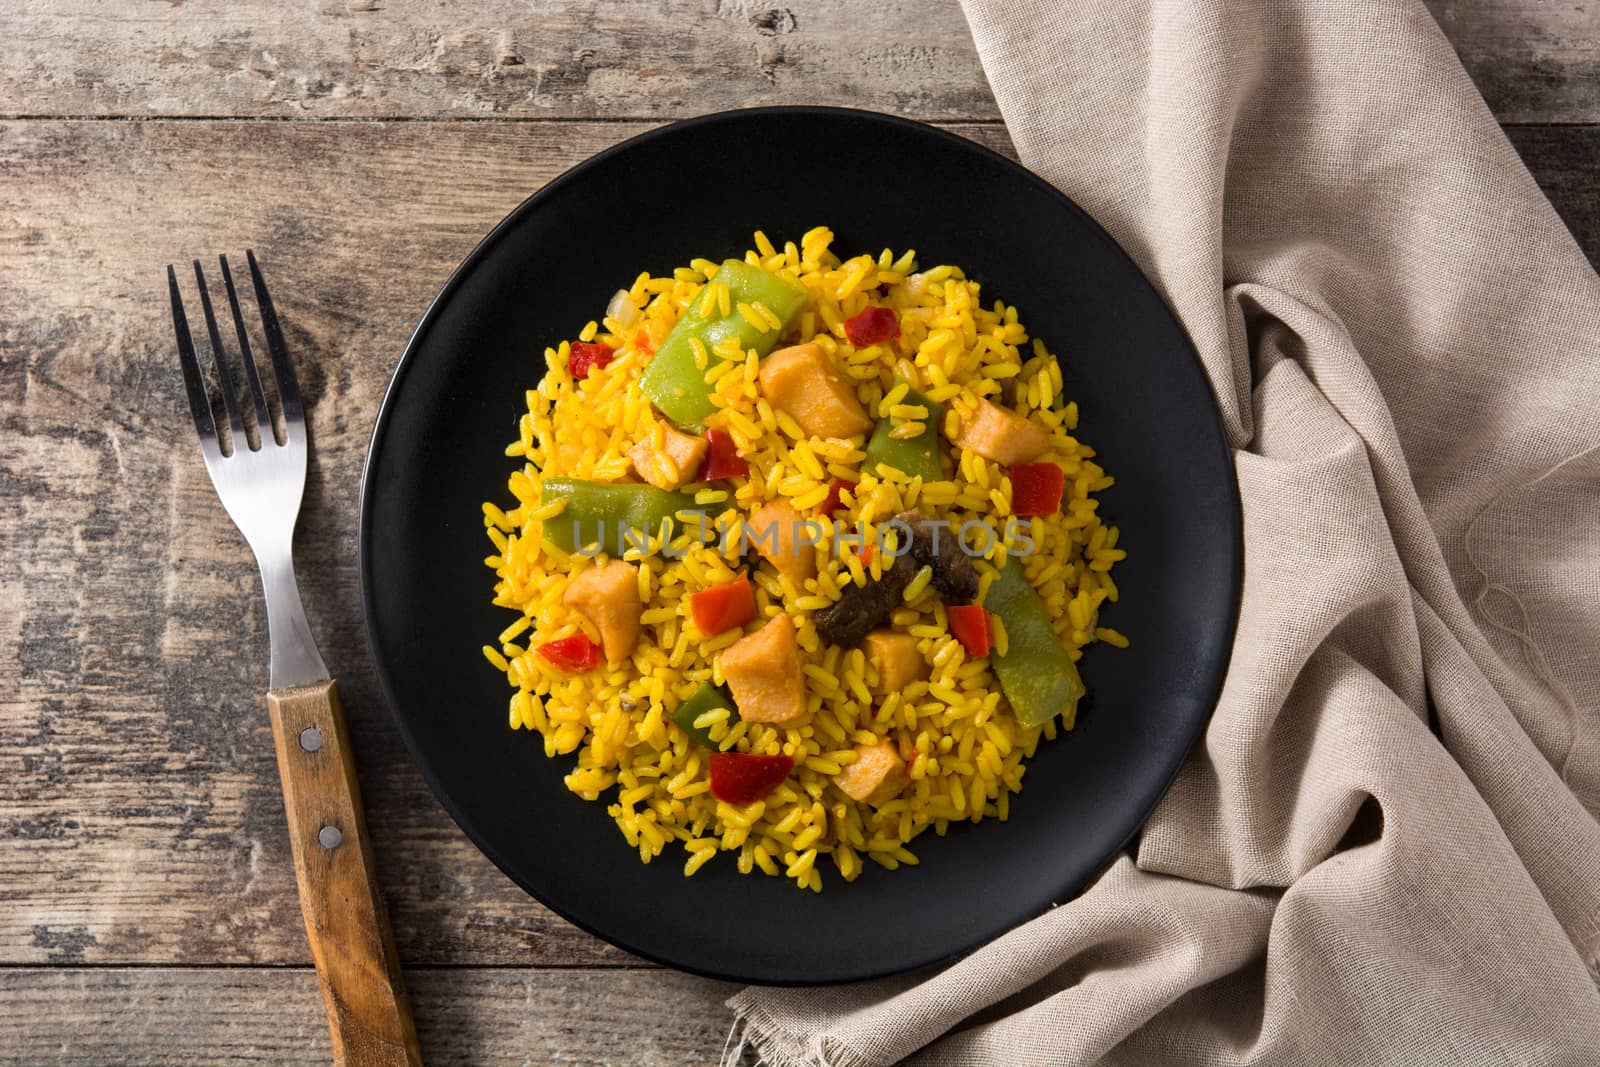 Fried rice with chicken and vegetables by chandlervid85